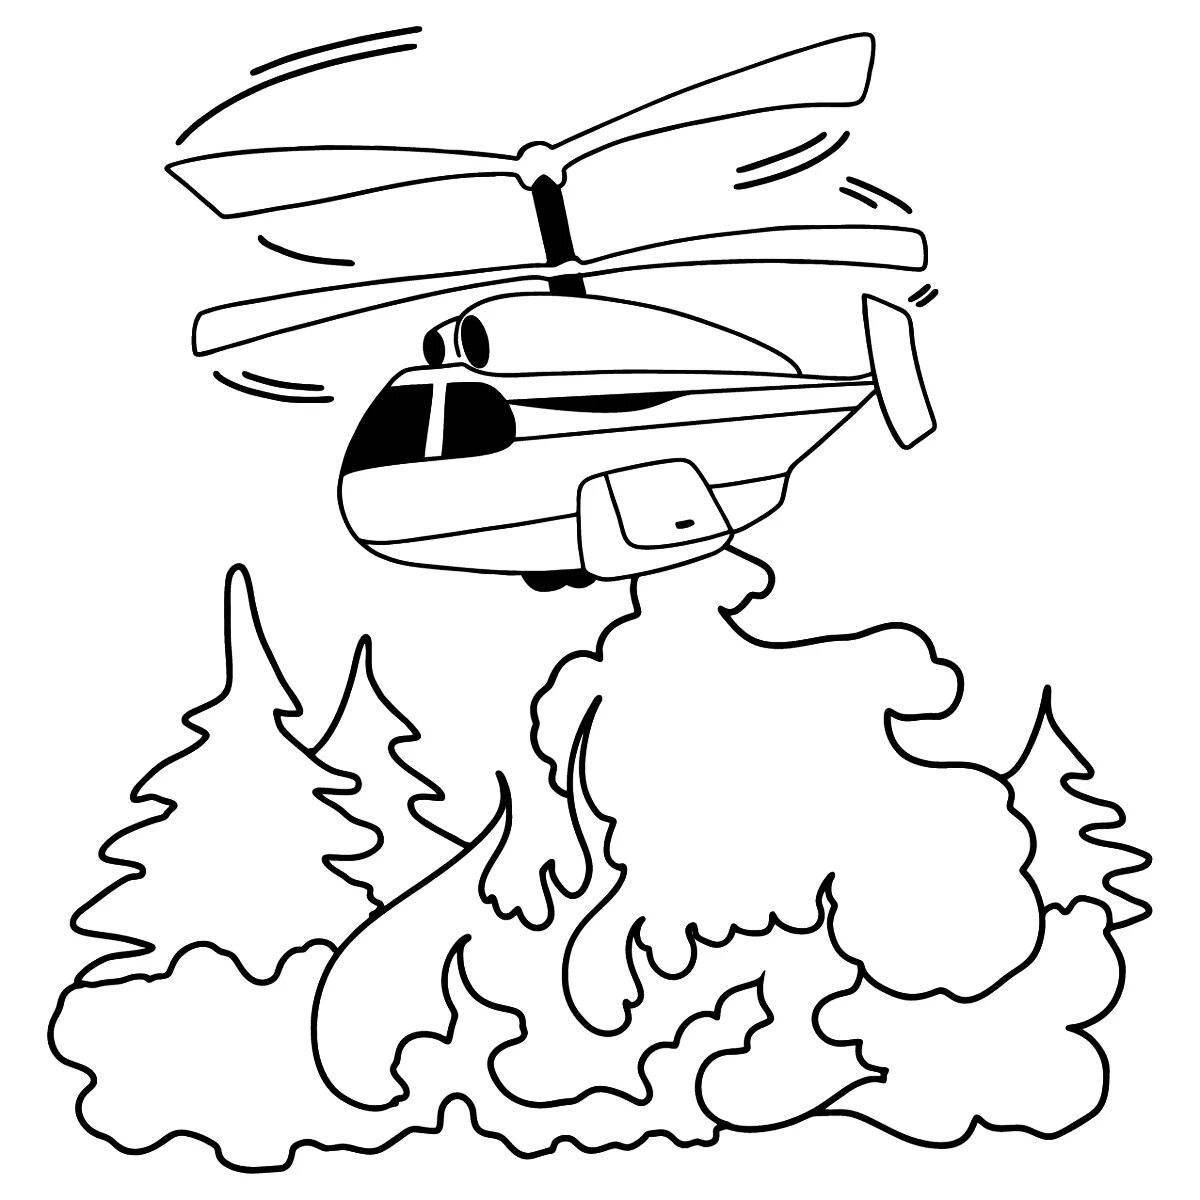 Dazzling Rescue Helicopter Coloring Page